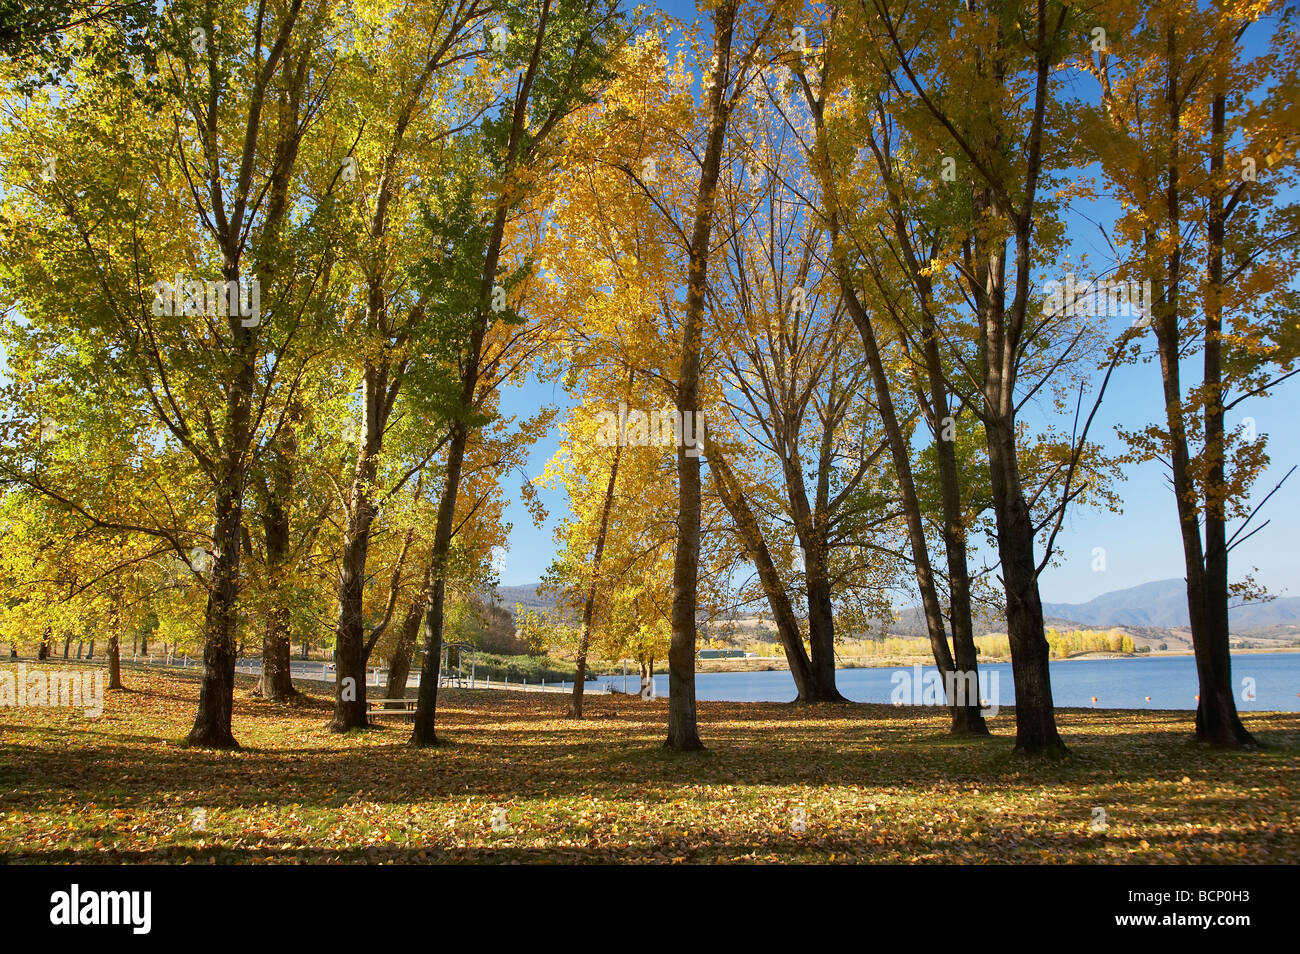 Autumn Trees at Boat Ramp Picnic Area by Khancoban Pondage Snowy Mountains Southern New South Wales Australia Stock Photo